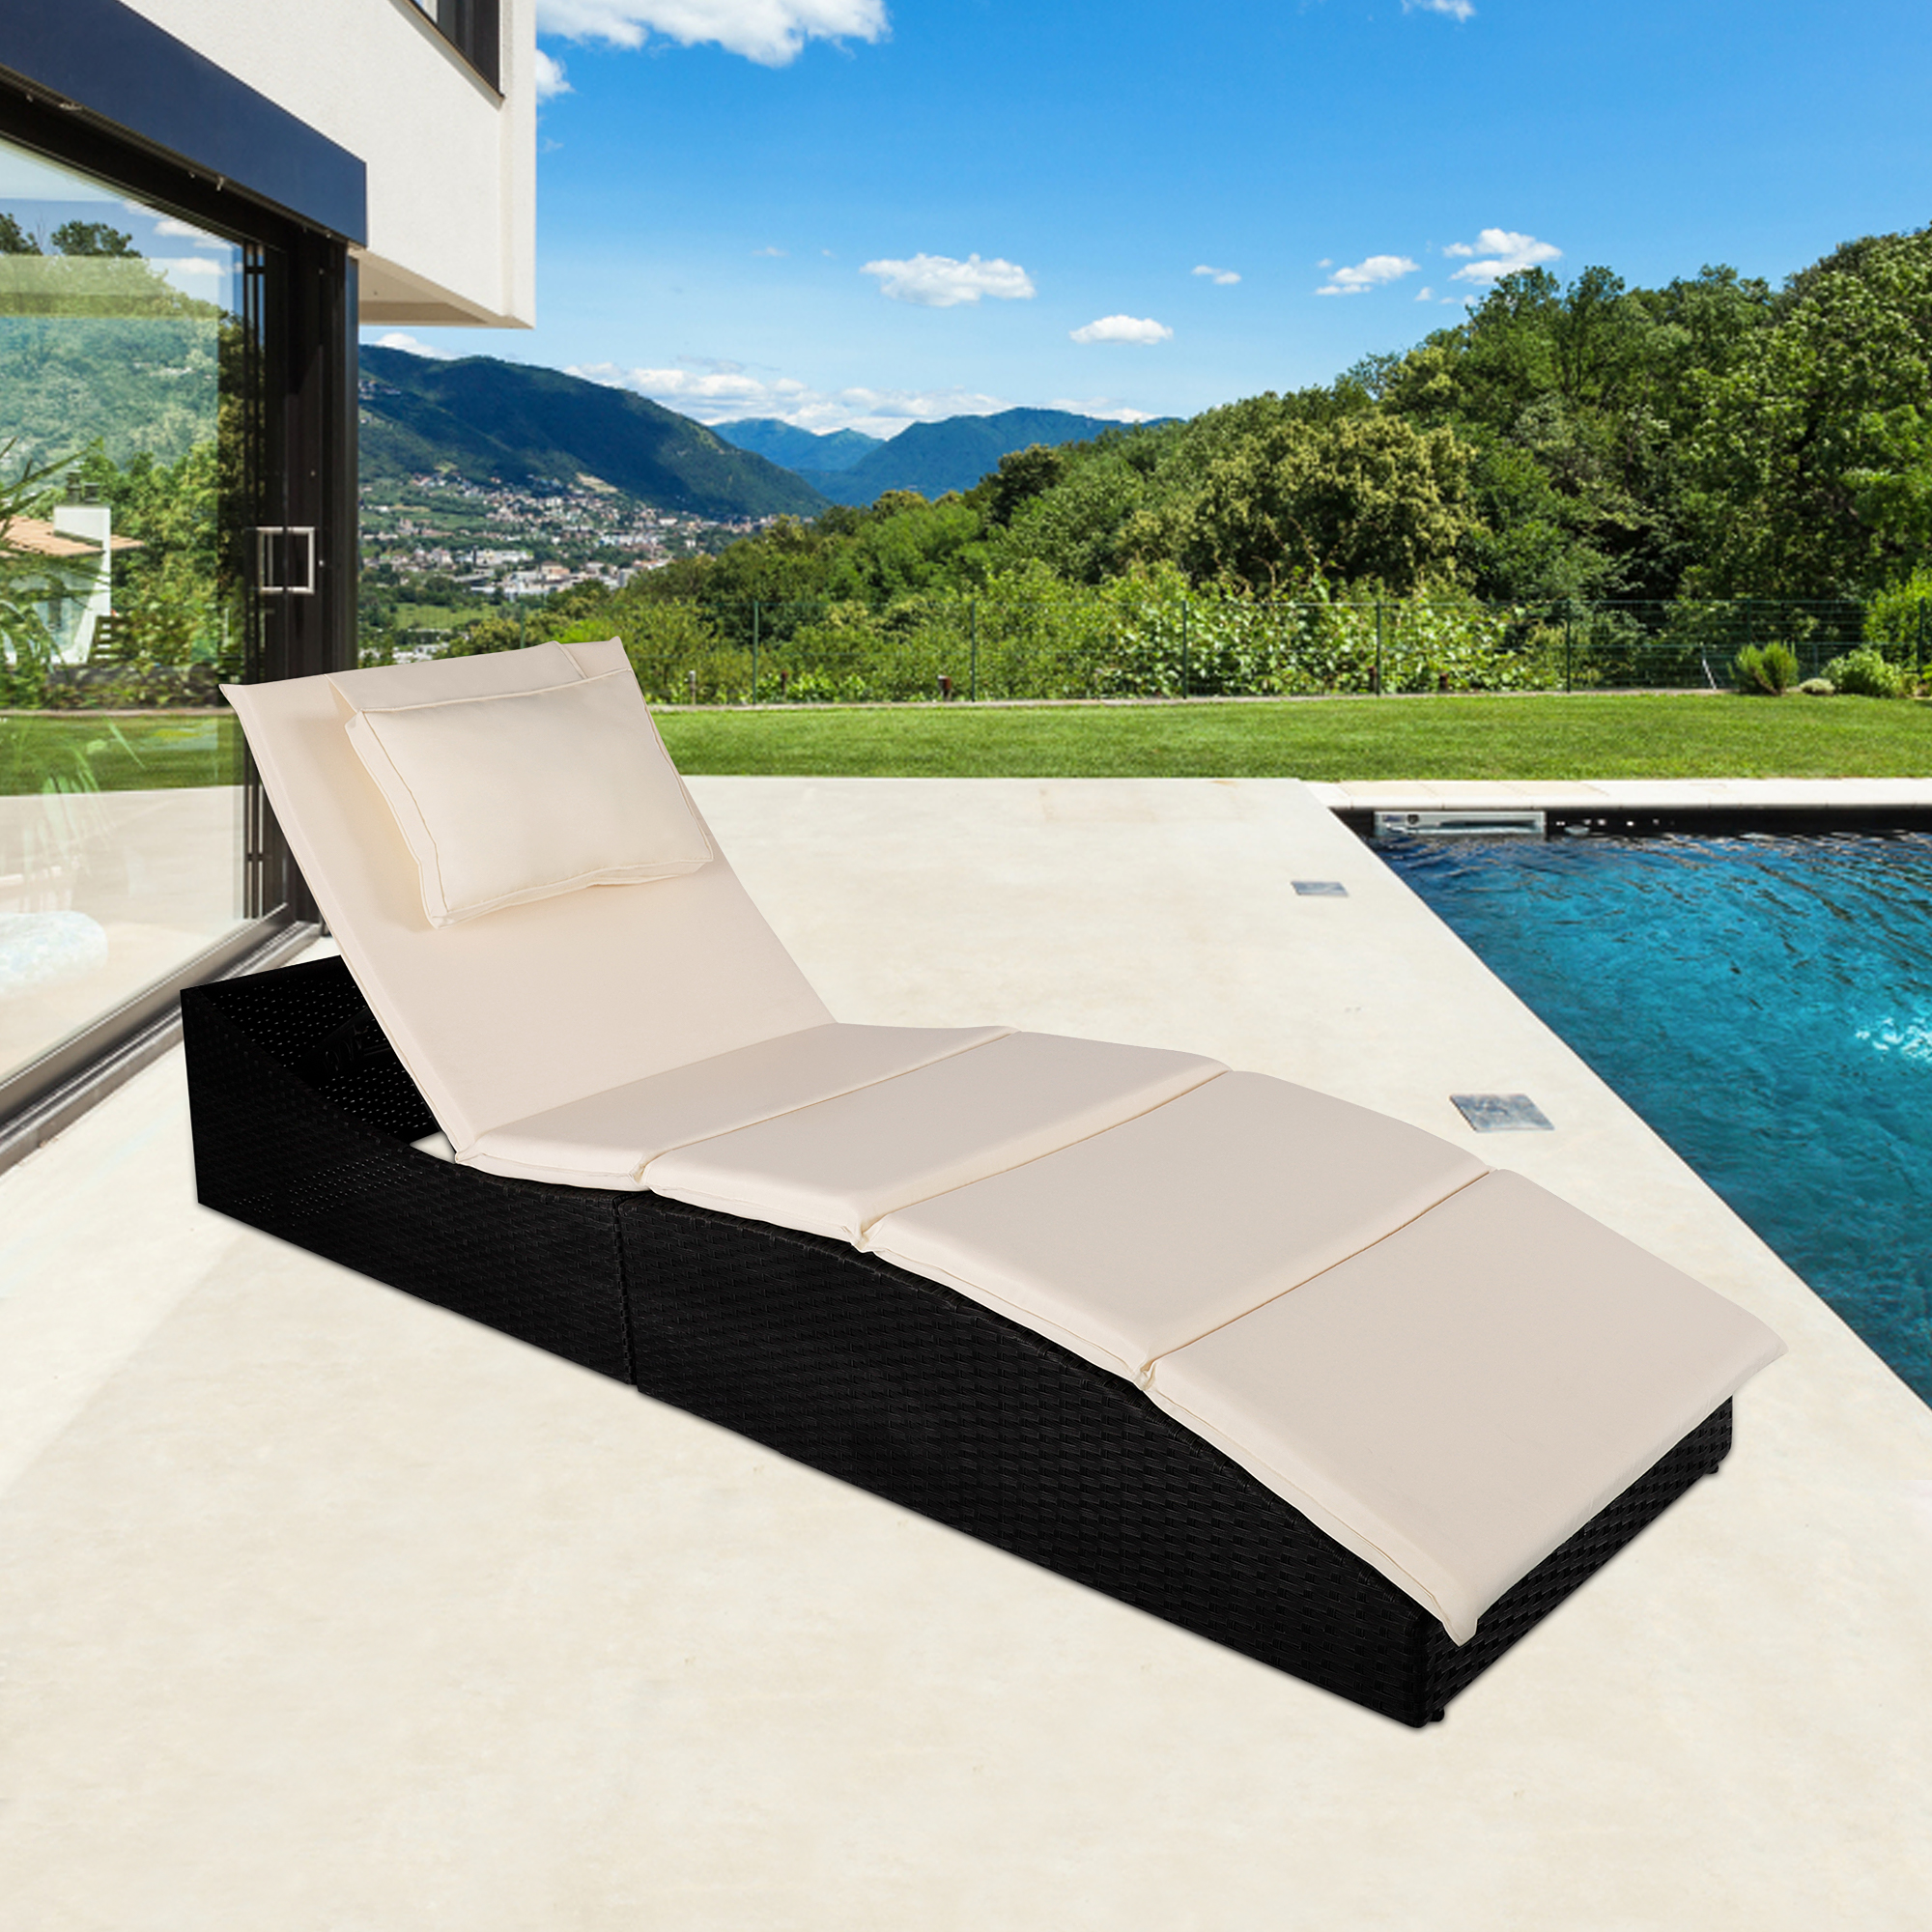 Patio Rattan Pool Lounge Chair with Cushion, 5 Adjustable Positions Folding Patio Chaise Lounge, Outdoor Wicker Beach Reclining Chair, PE Rattan Beach Lounger Chair for Balcony Deck Patio Garden, T245 - image 1 of 9